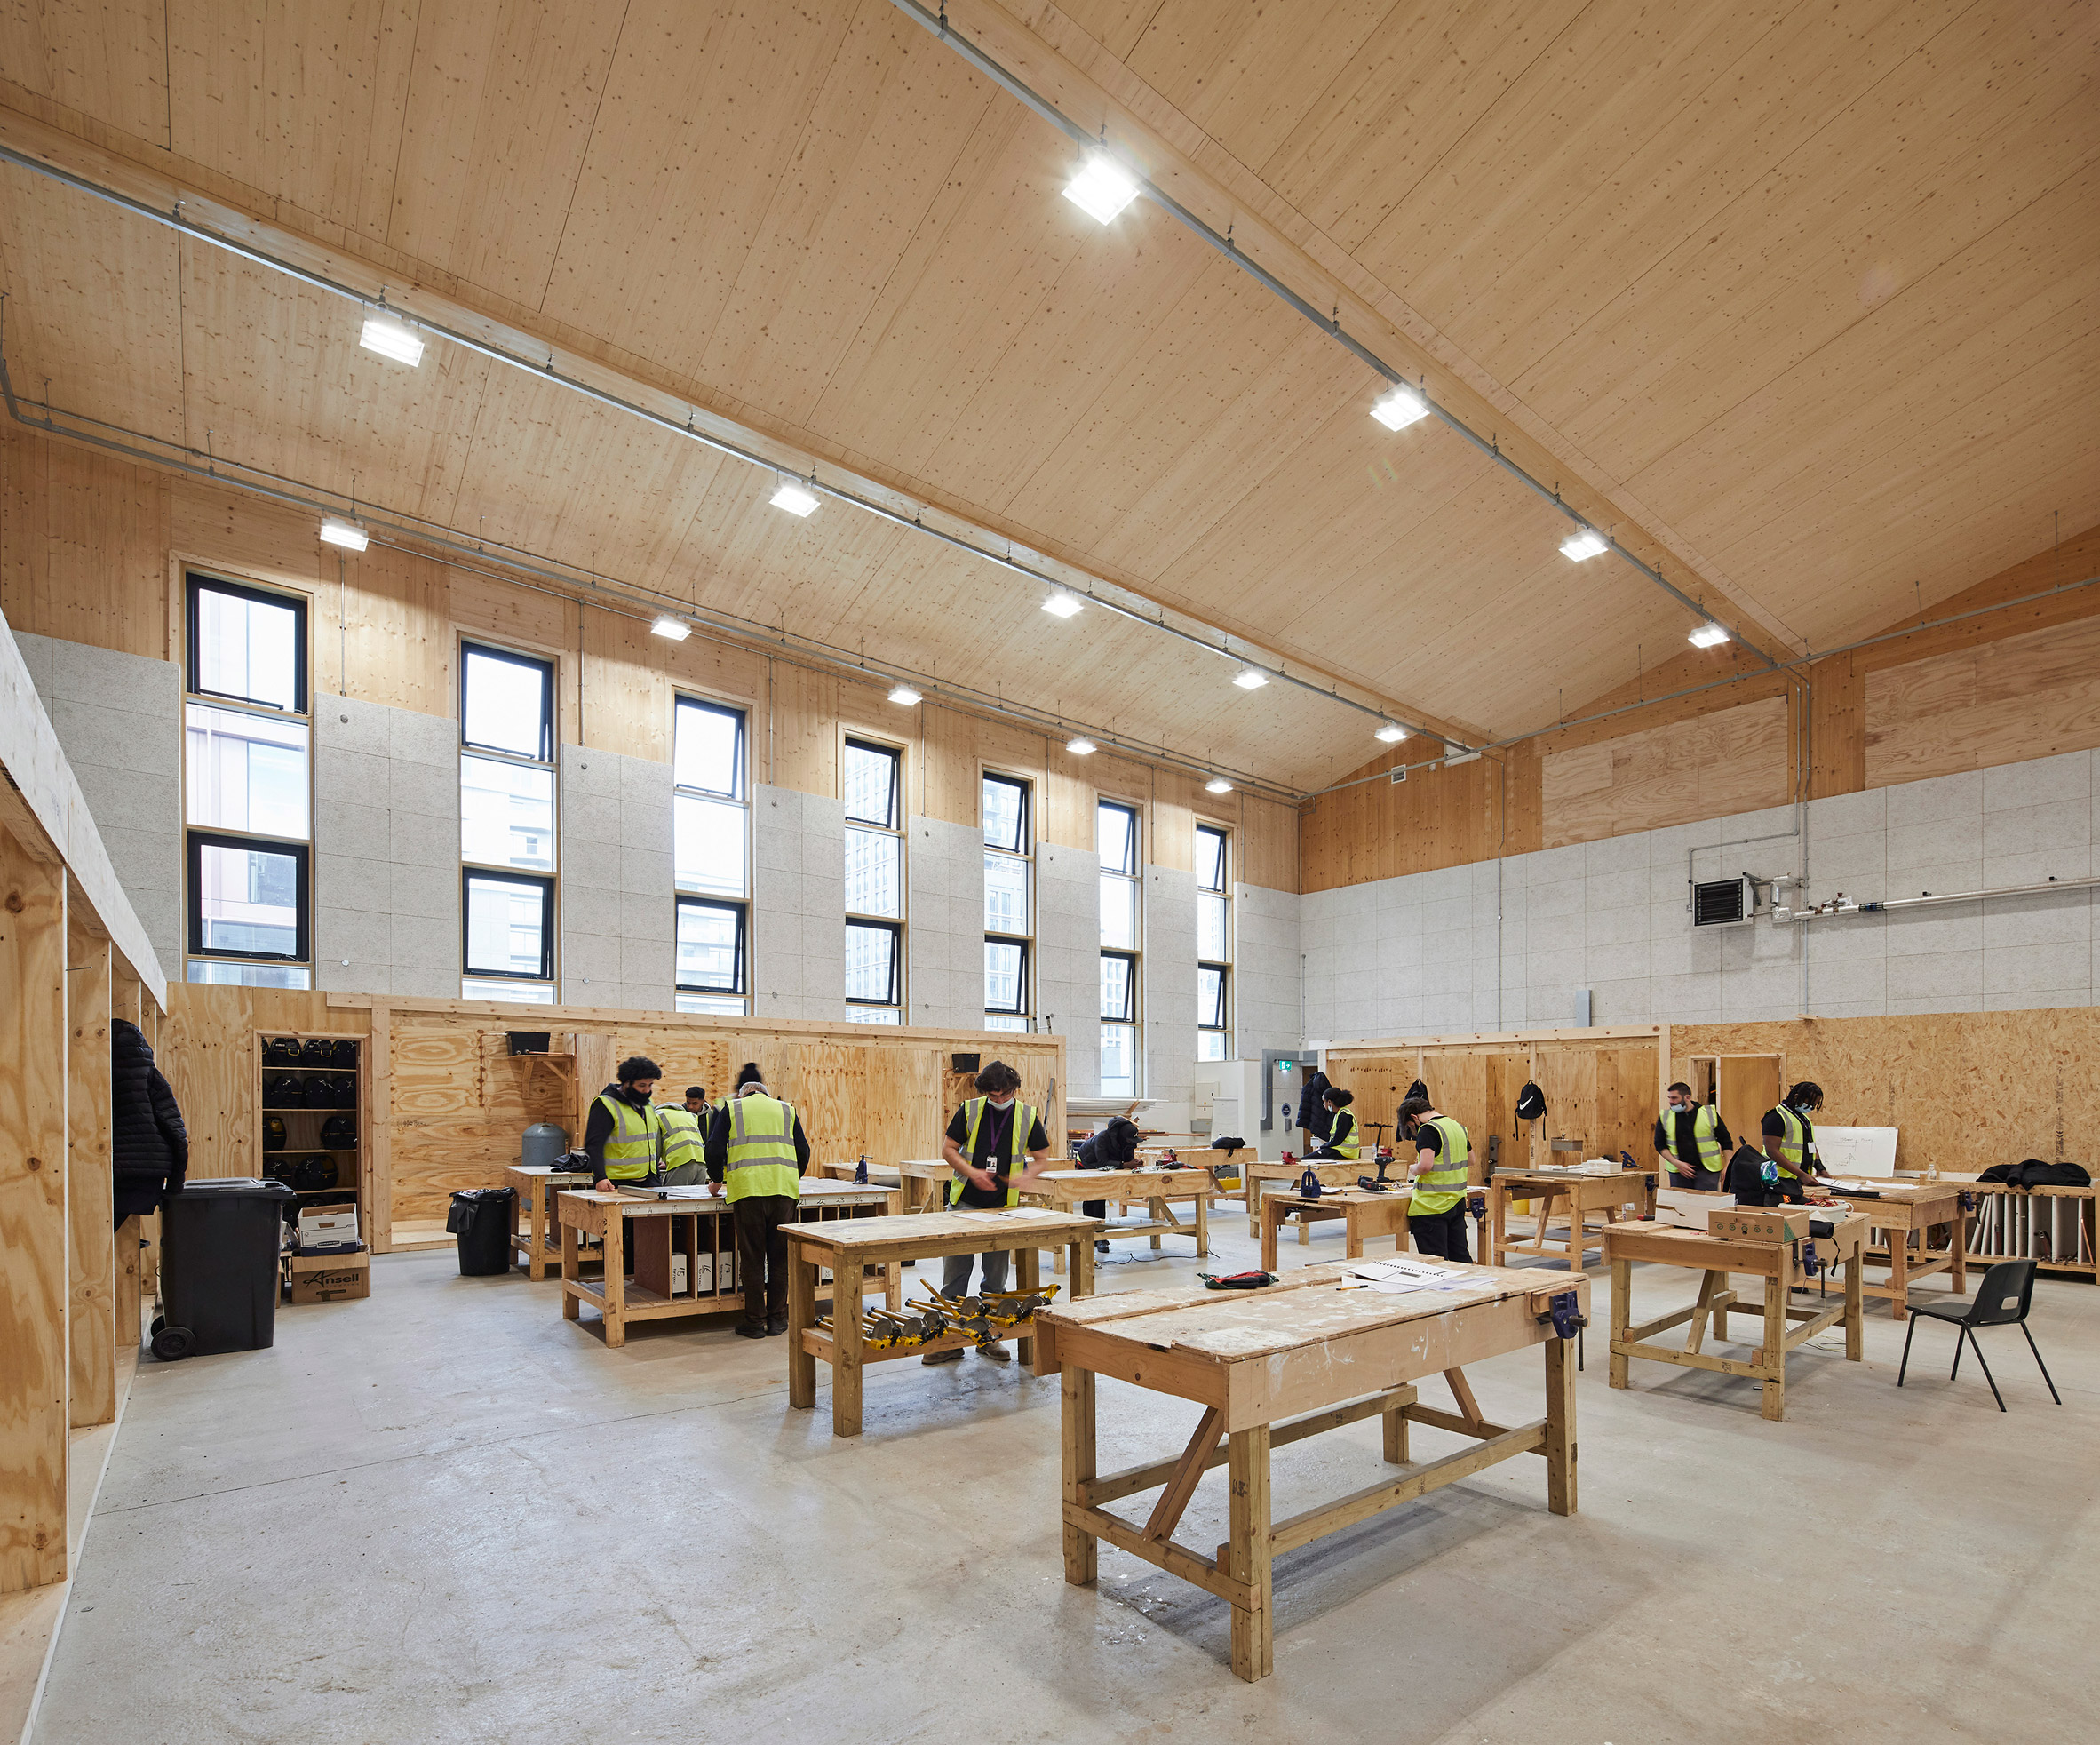 Construction Skills Centre in King's Cross Sports Hal